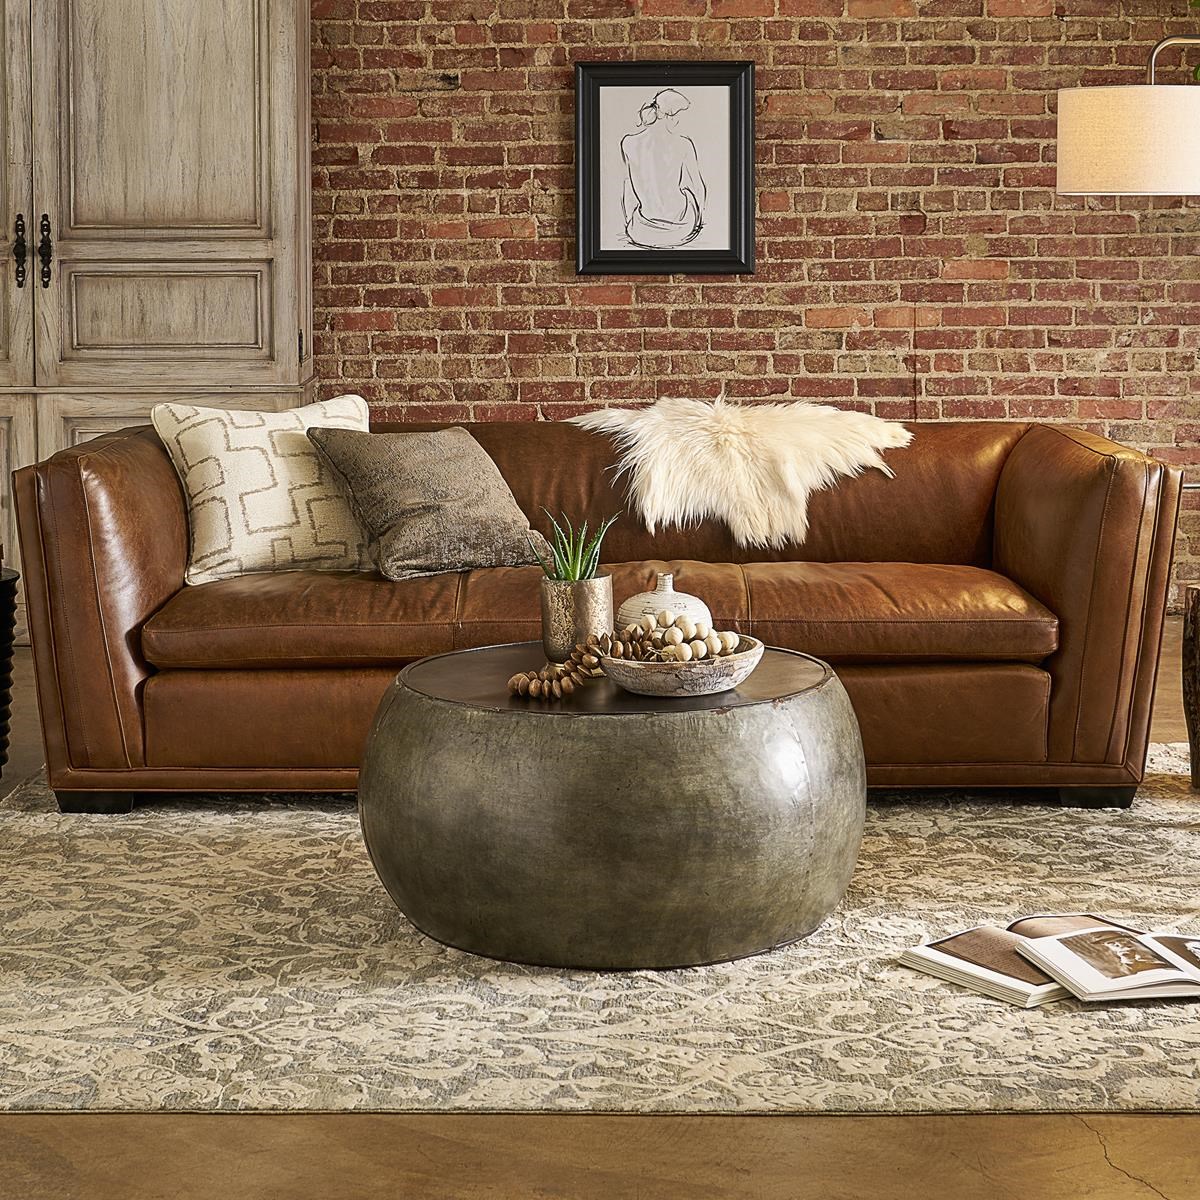 Ideas for Wall Colors that Go with Brown Furniture | The Inside